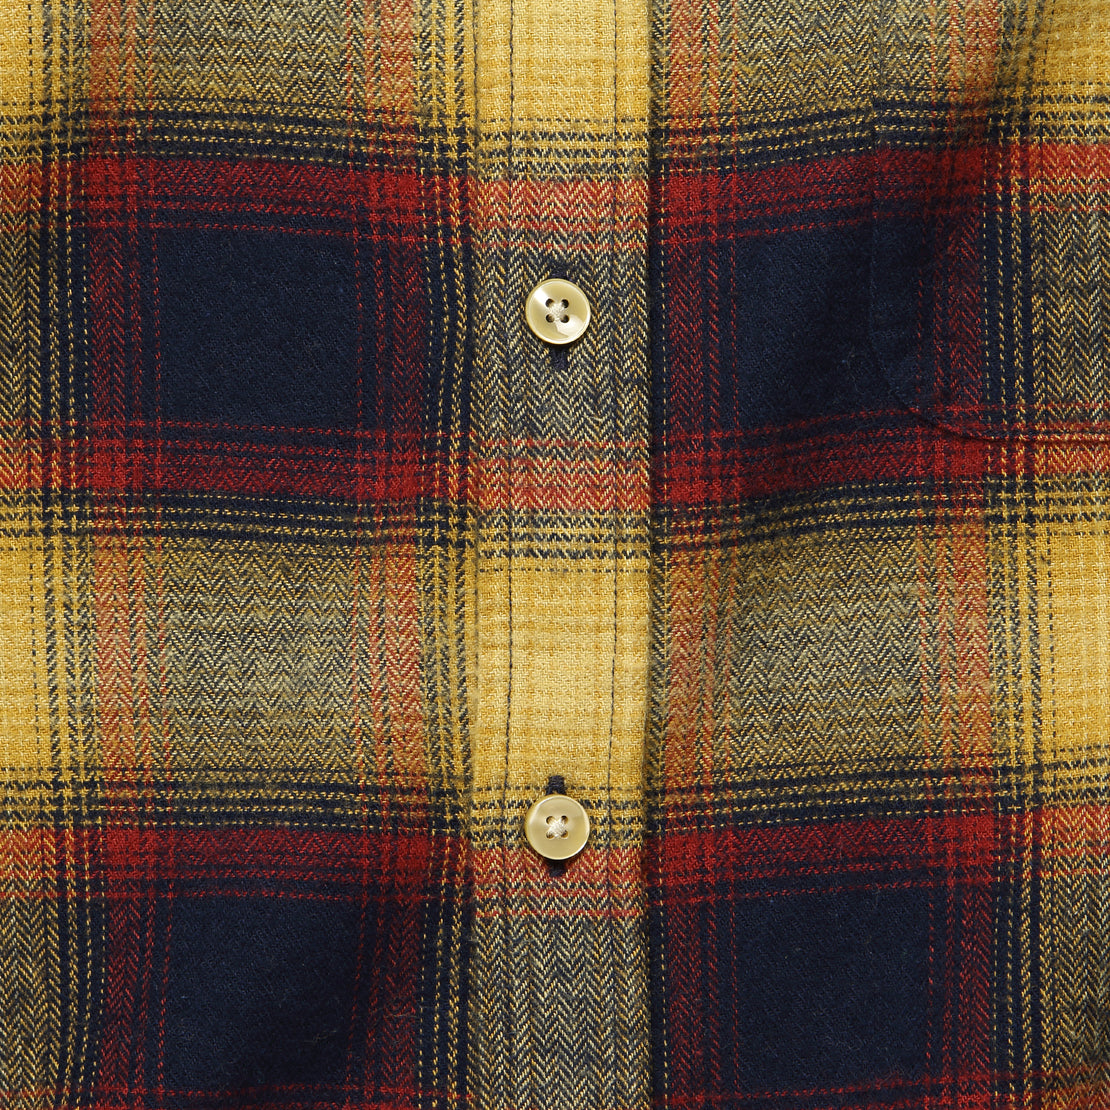 Hill Shirt - Navy/Red/Orange - Portuguese Flannel - STAG Provisions - Tops - L/S Woven - Plaid